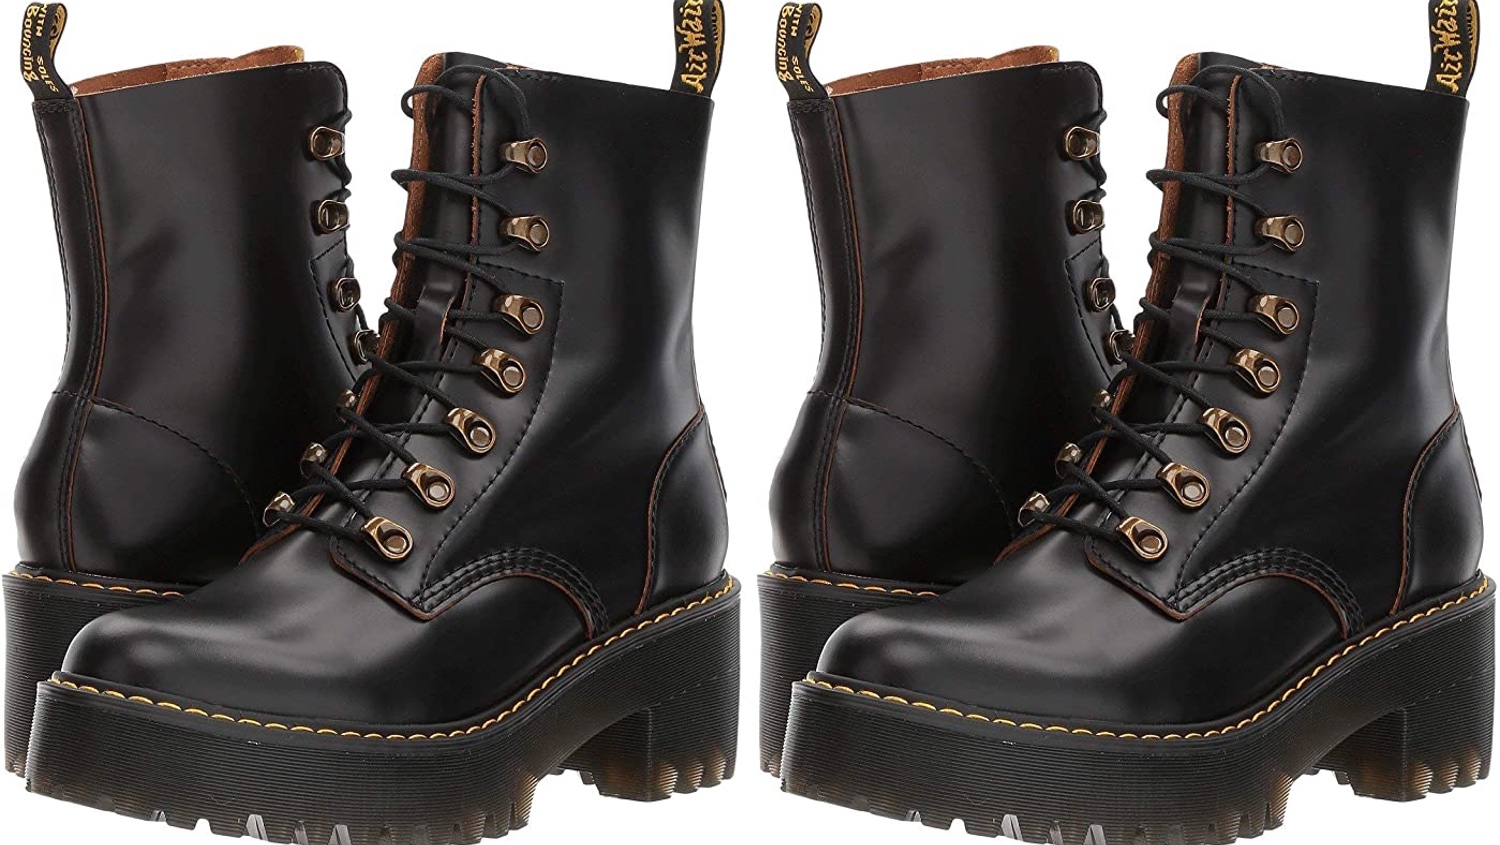 You can get women's Dr. Martens boots 25% off on Amazon right